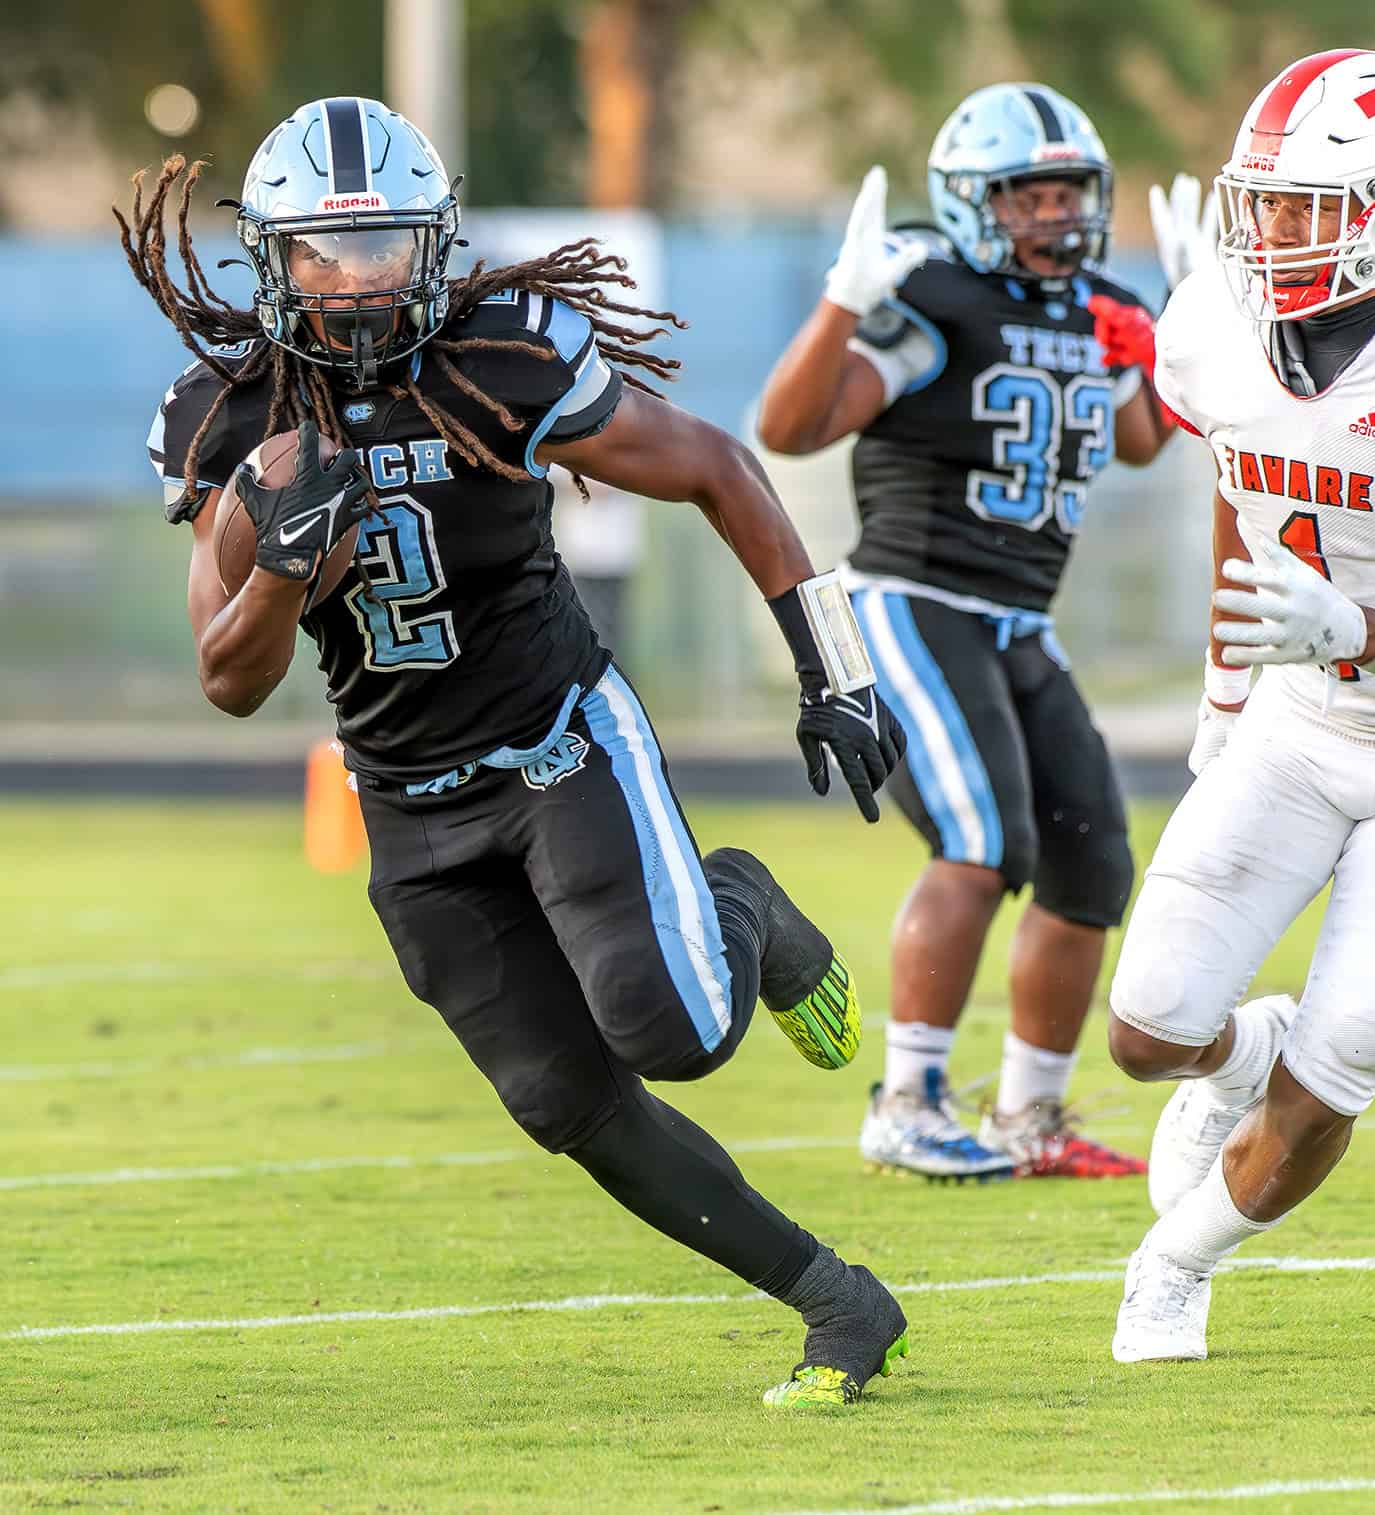 Nature Coast Tech, 2, Timothy “T3” Gaynor breaks lose for a big gain versus visiting Tavares High Friday in Brooksville. Photo by [Joseph DiCristofalo]